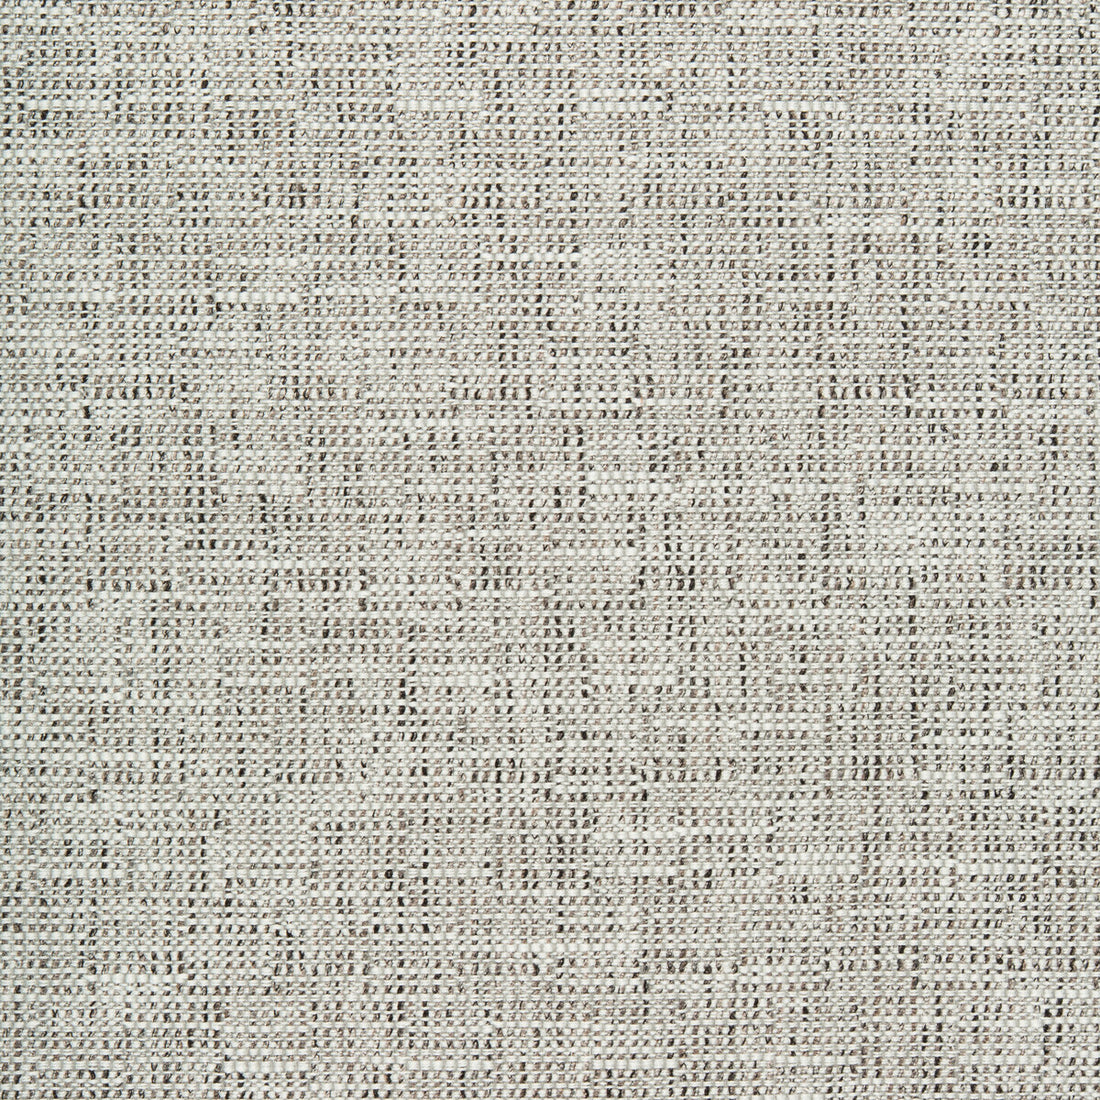 Kravet Smart fabric in 35518-121 color - pattern 35518.121.0 - by Kravet Smart in the Inside Out Performance Fabrics collection